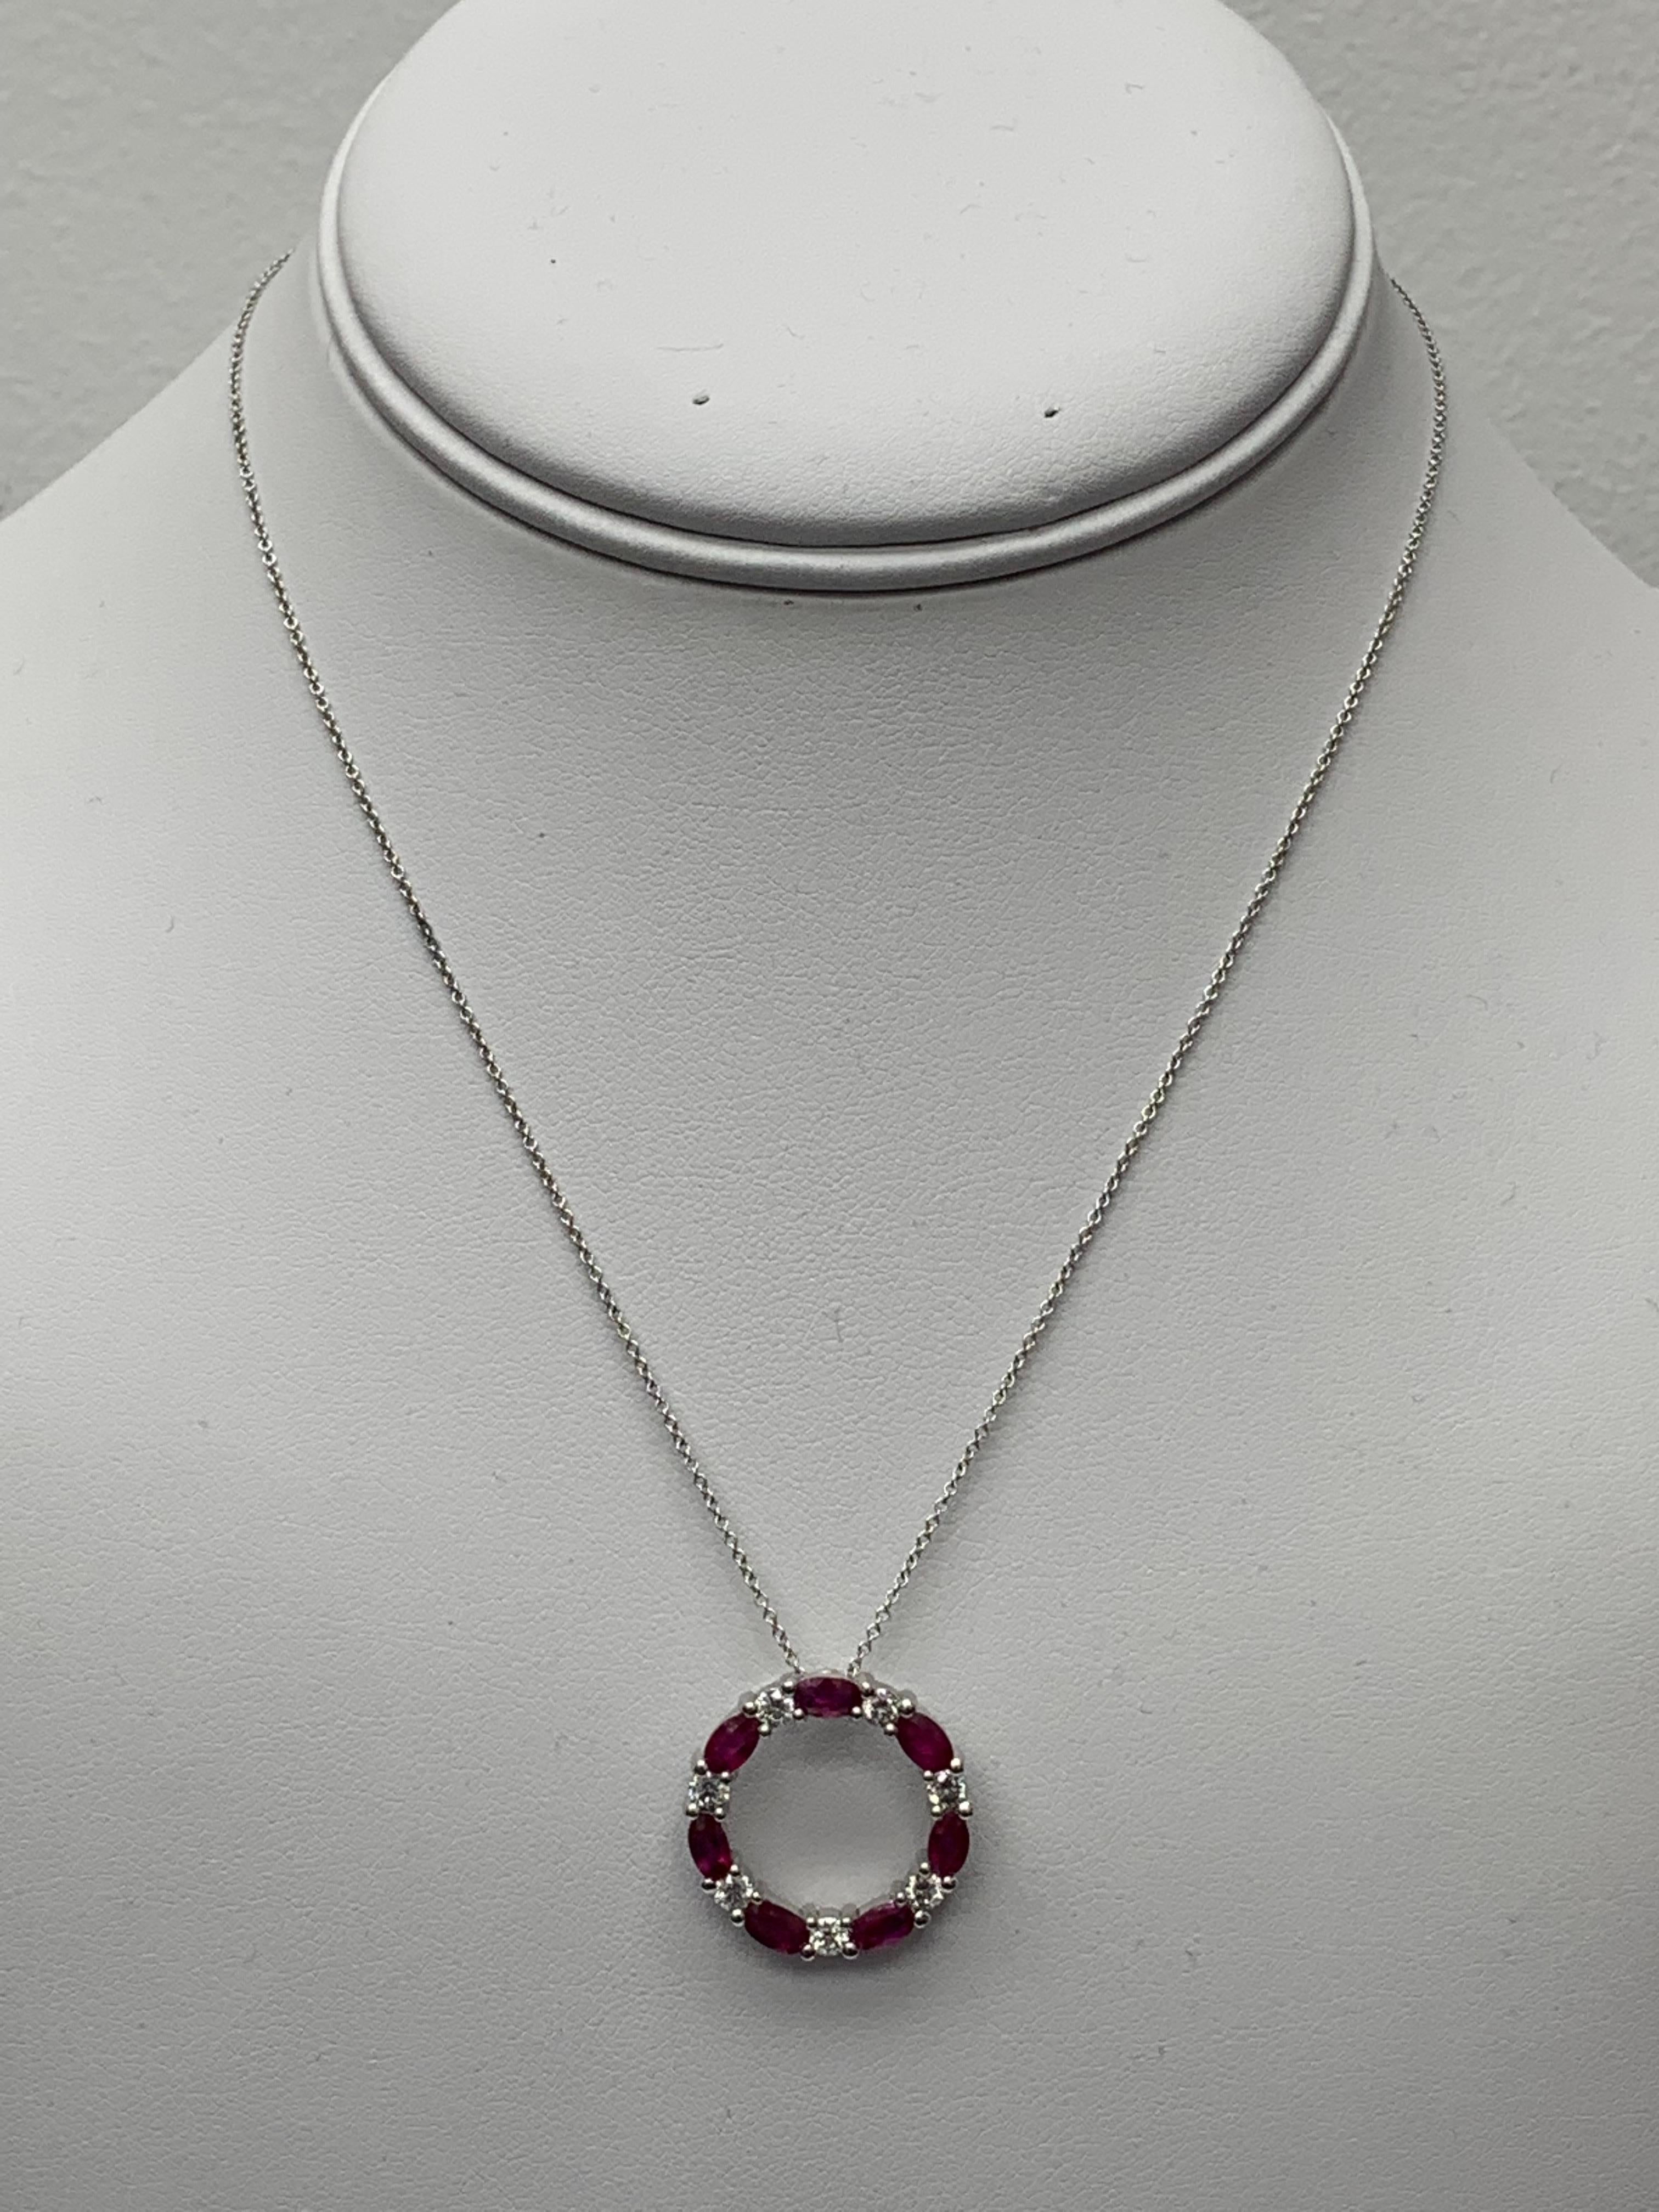 Mixed Cut 1.99 Carat Ruby and Diamond Circle Pendant Necklace in 14k White Gold For Sale